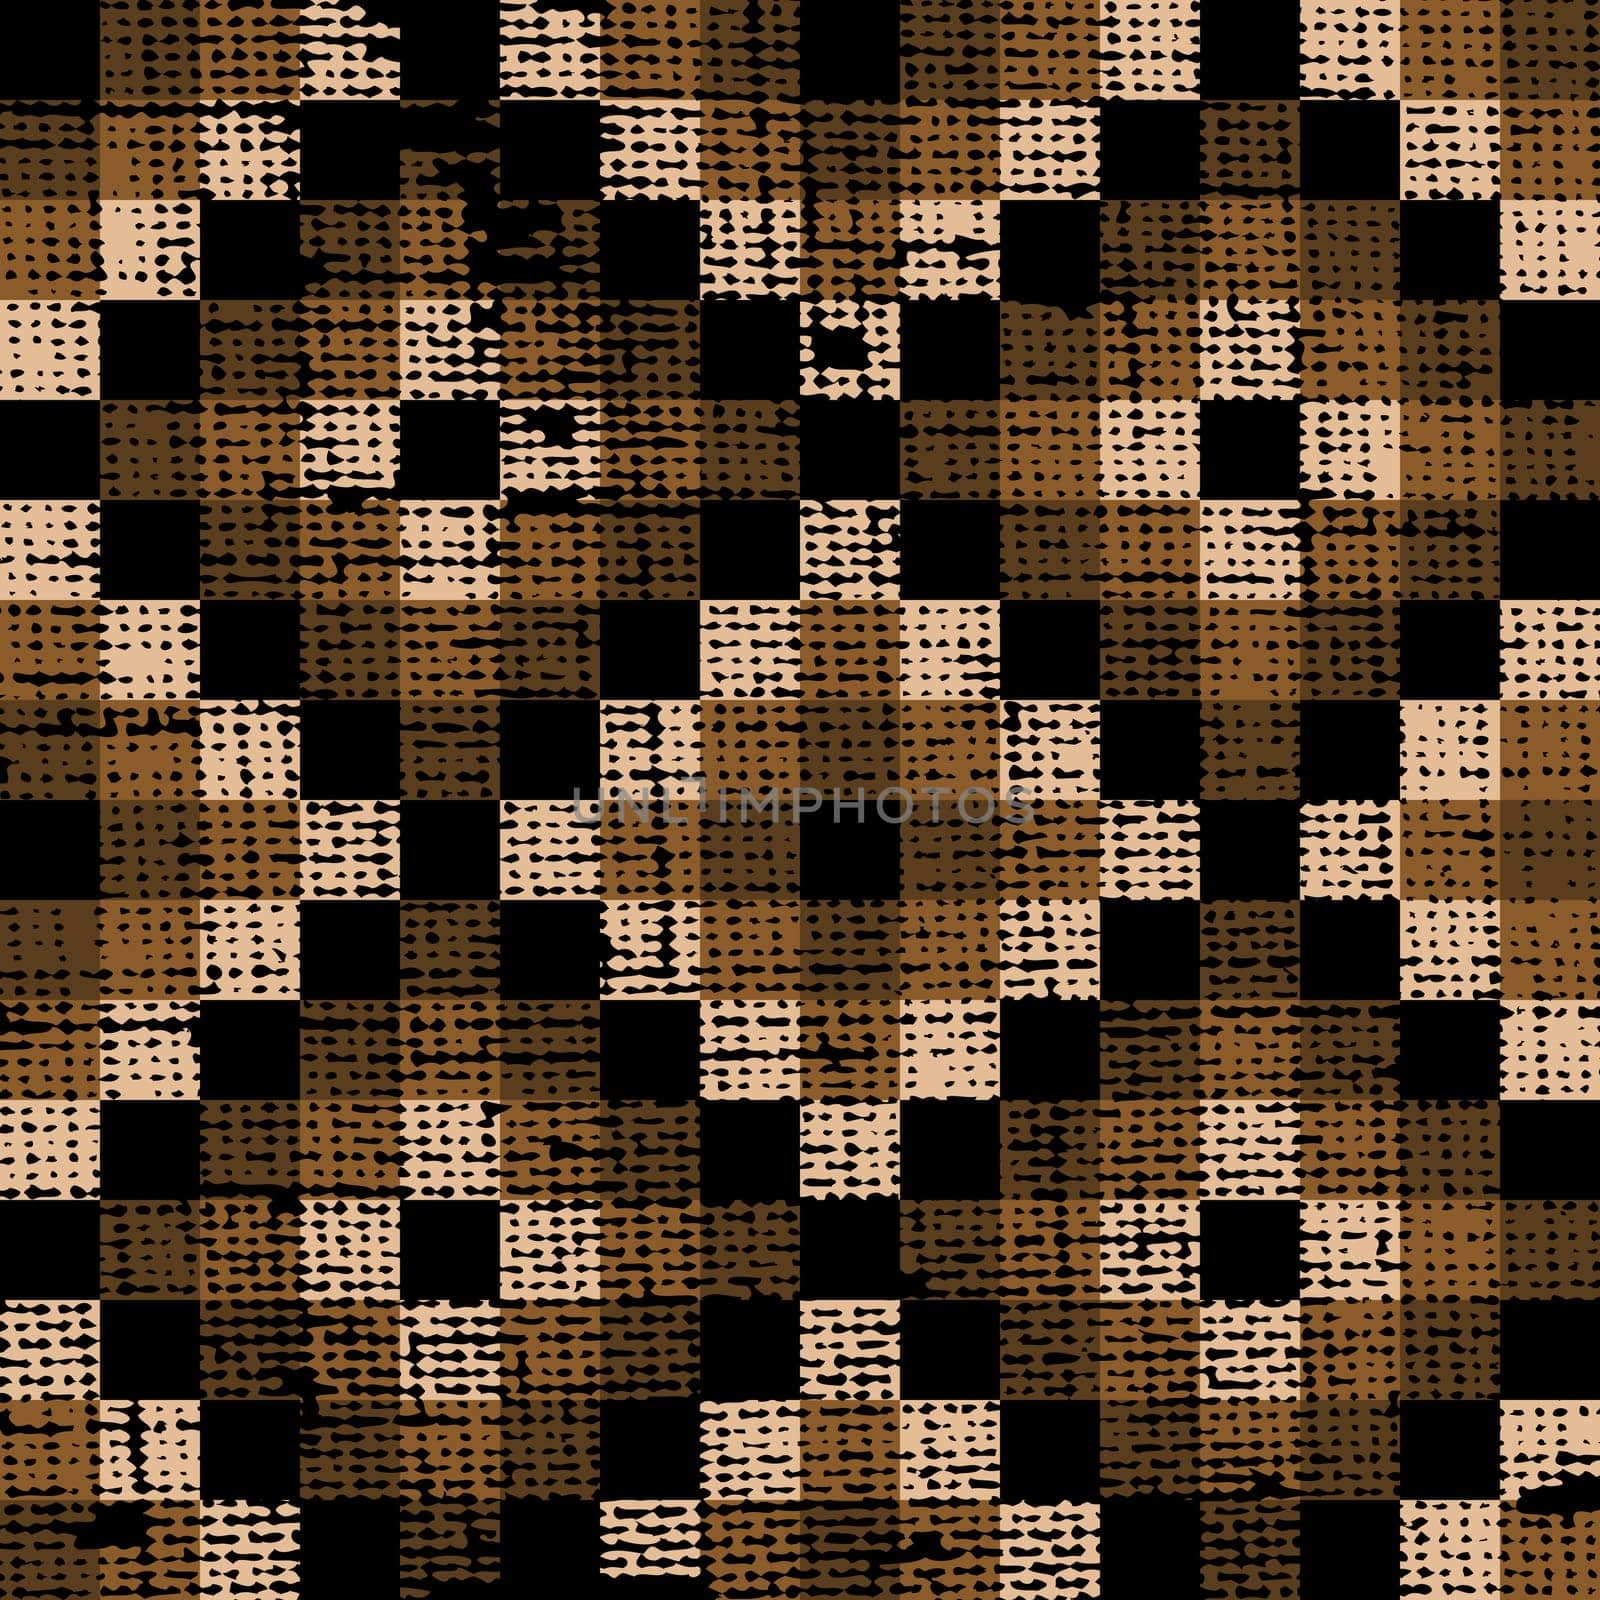 Grunge brown and beige mosaic with squares, geometric pattern by hibrida13